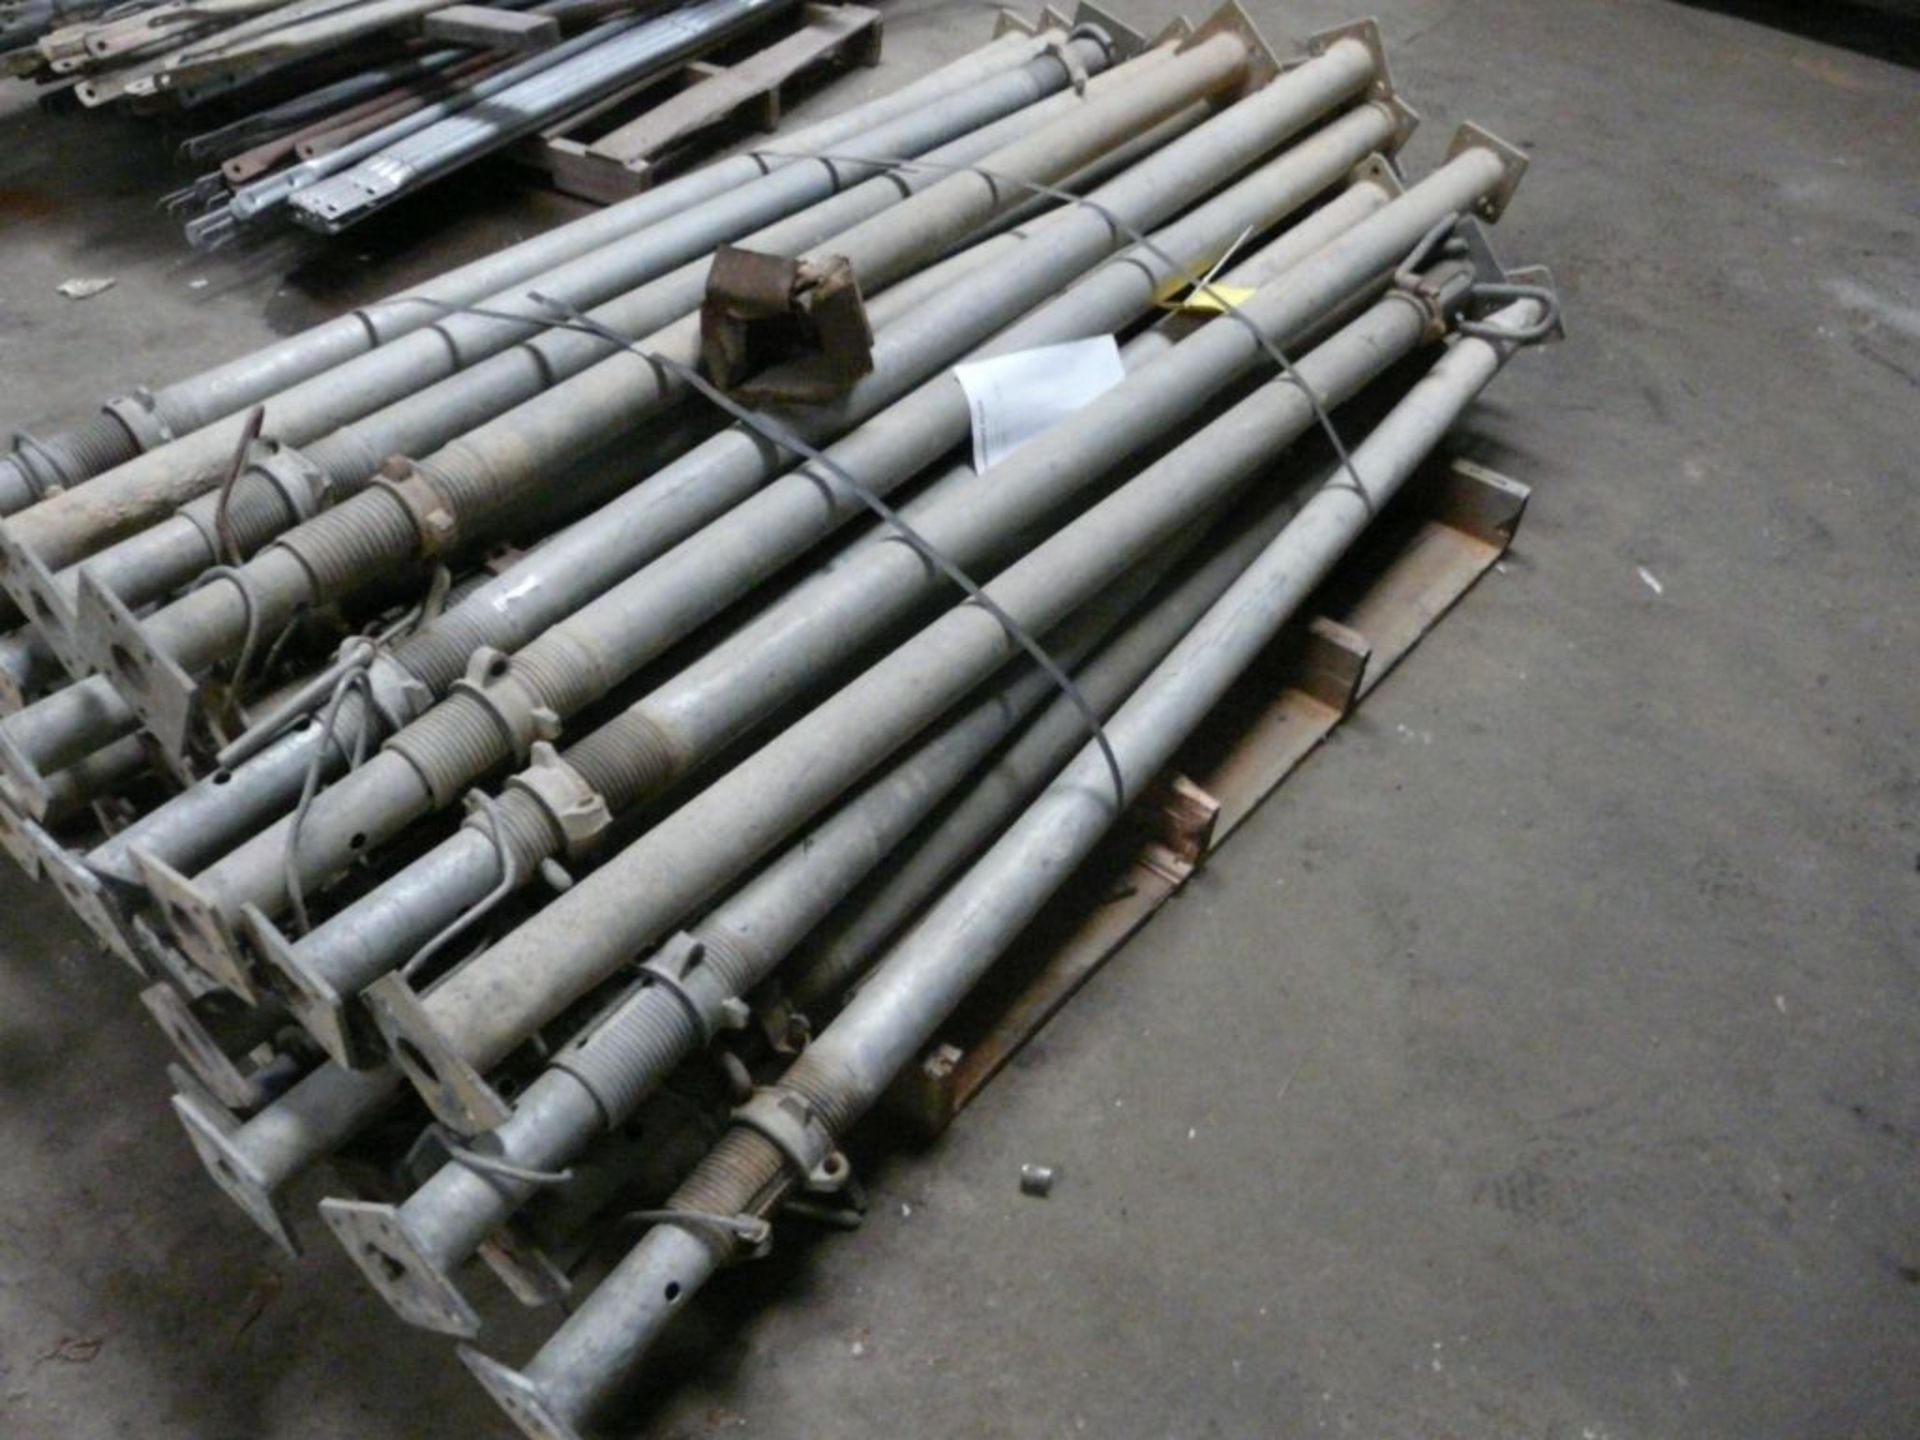 Lot of (30) Post Shores | 72" Extendable; Lot Loading Fee: $10.00 - Image 2 of 6